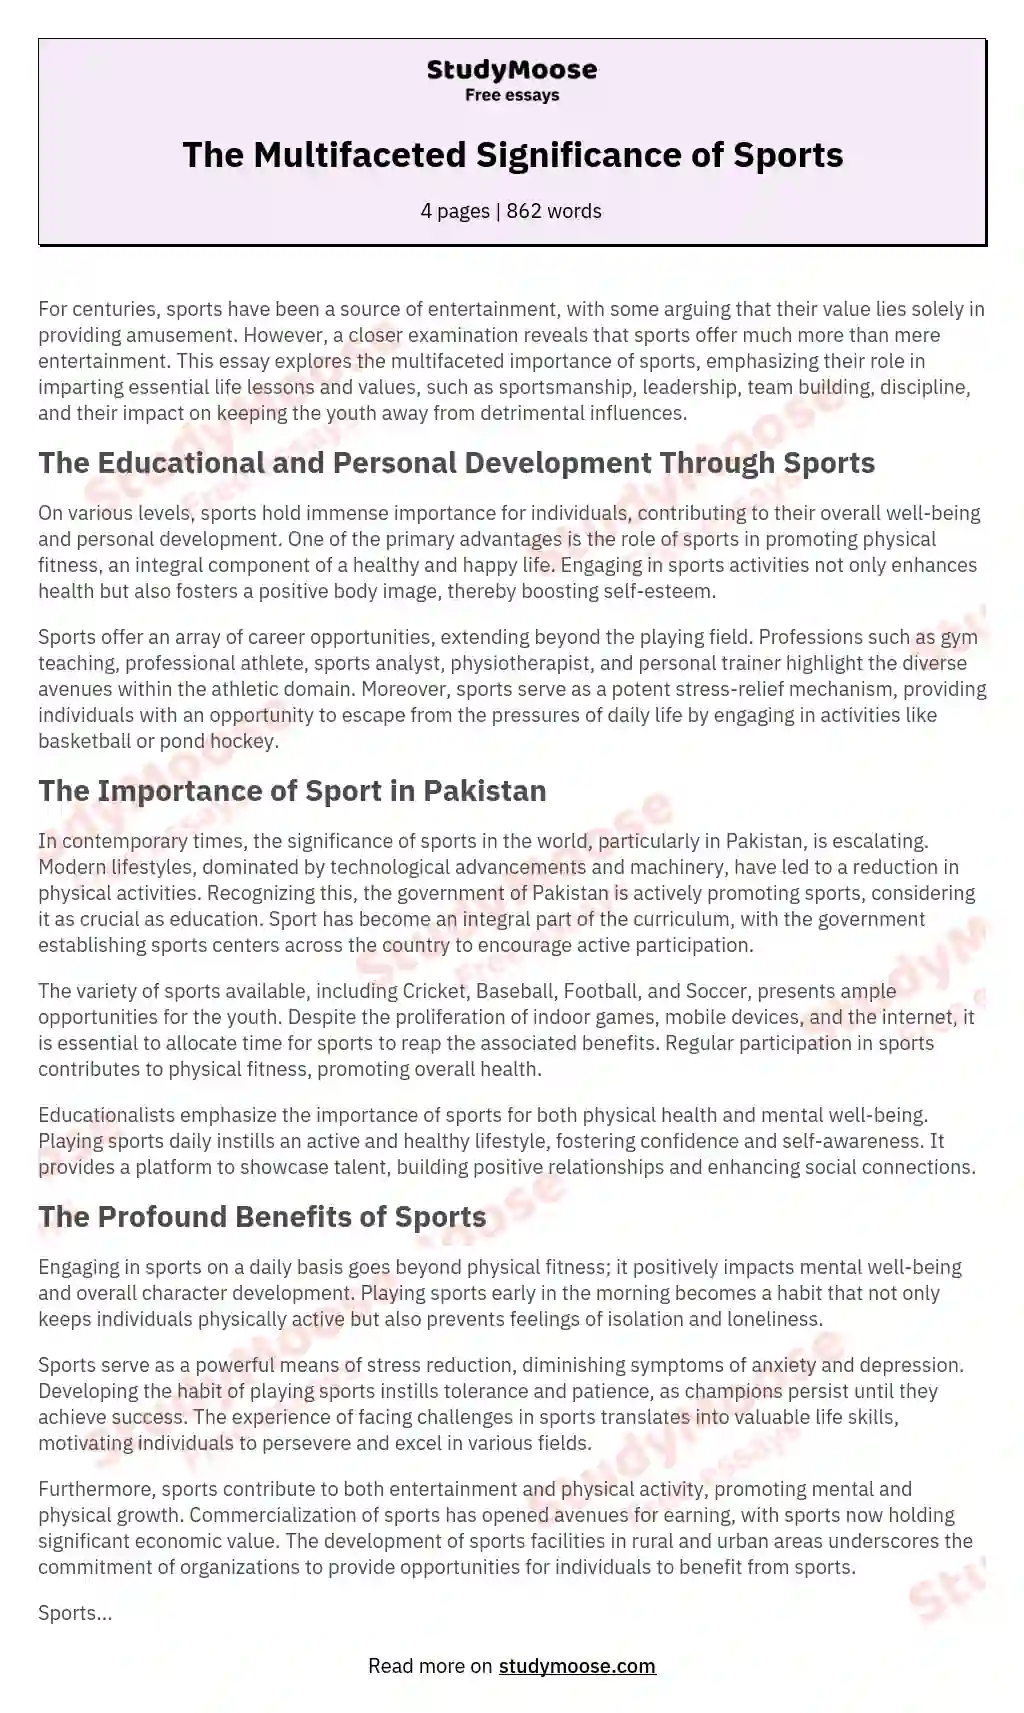 The Multifaceted Significance of Sports essay